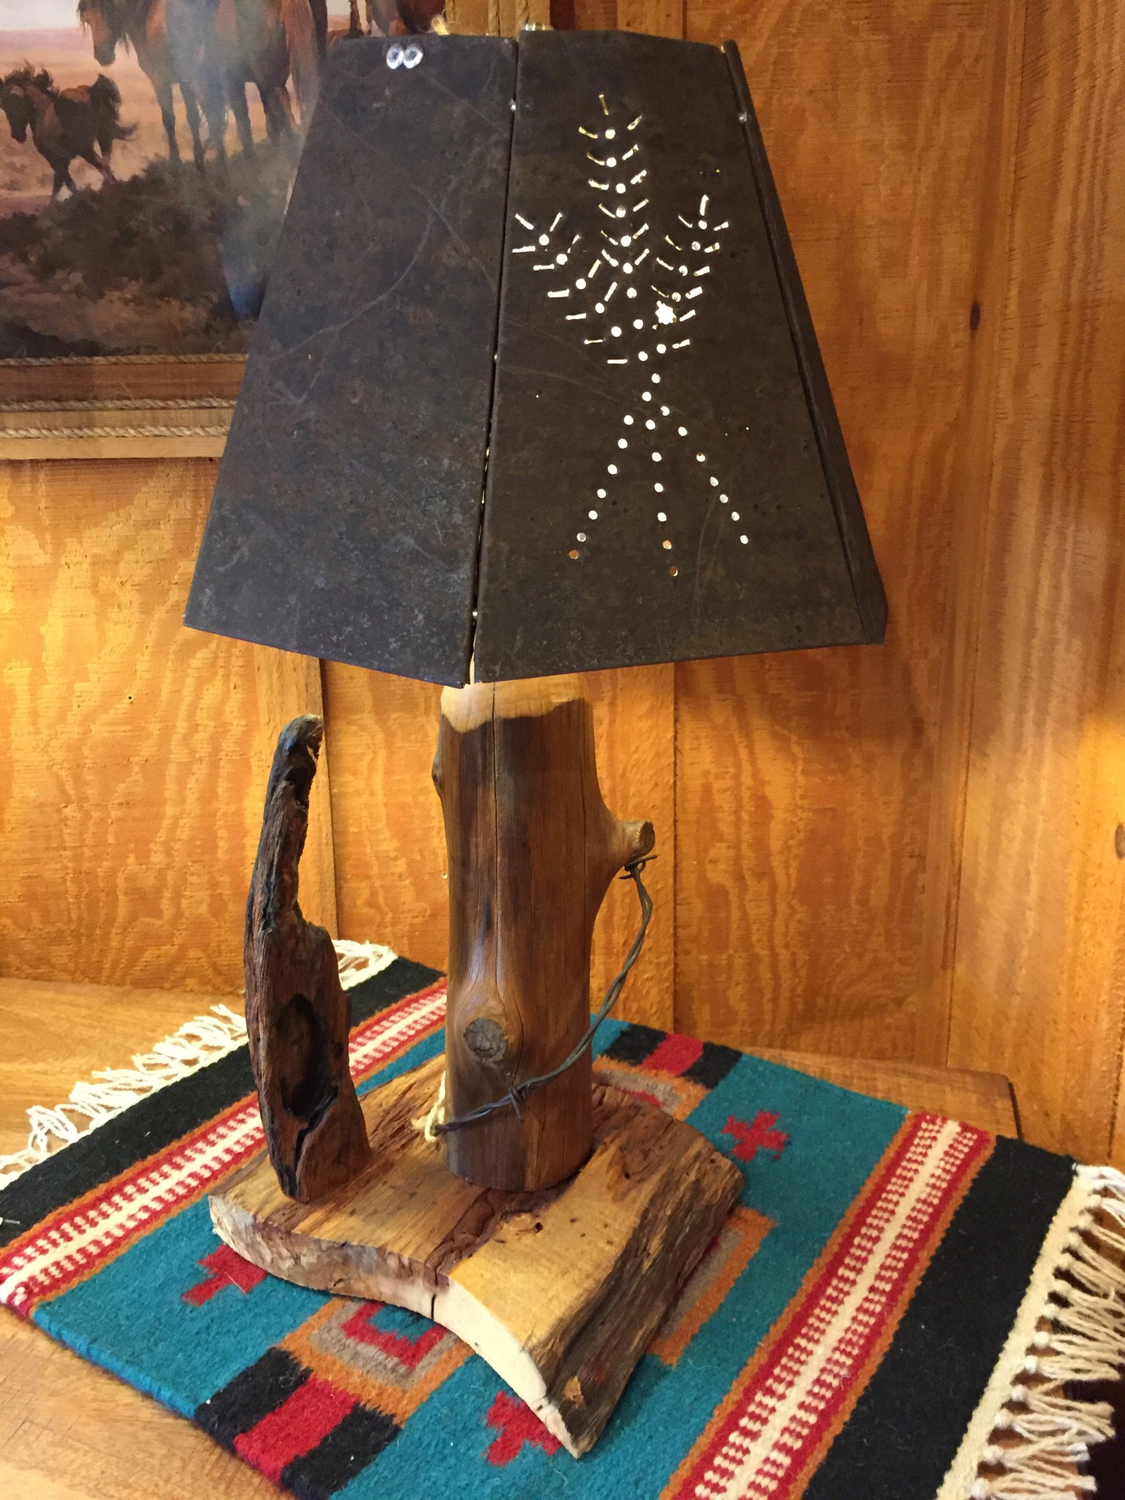 Handcrafted Table Lamp